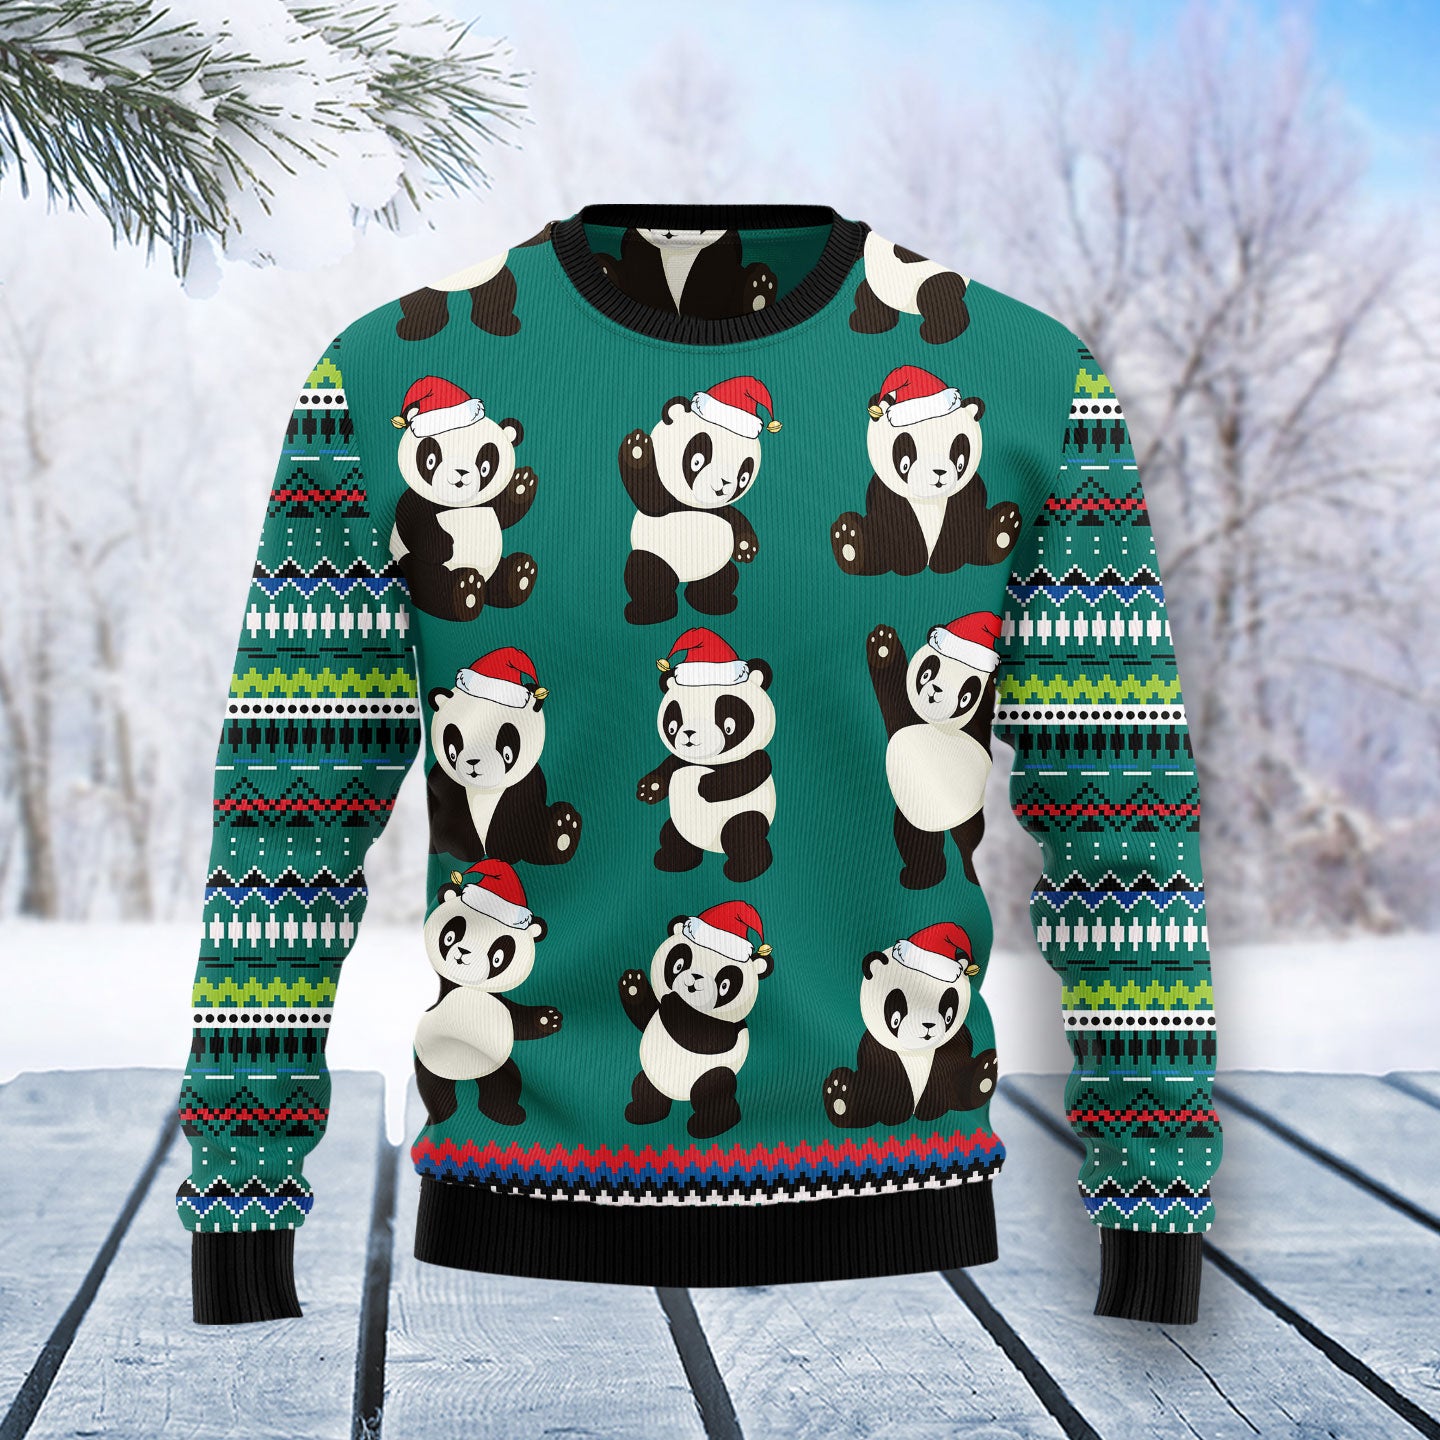 Panda Group Christmas T3011 unisex womens & mens, couples matching, friends, funny family ugly christmas holiday sweater gifts (plus size available)